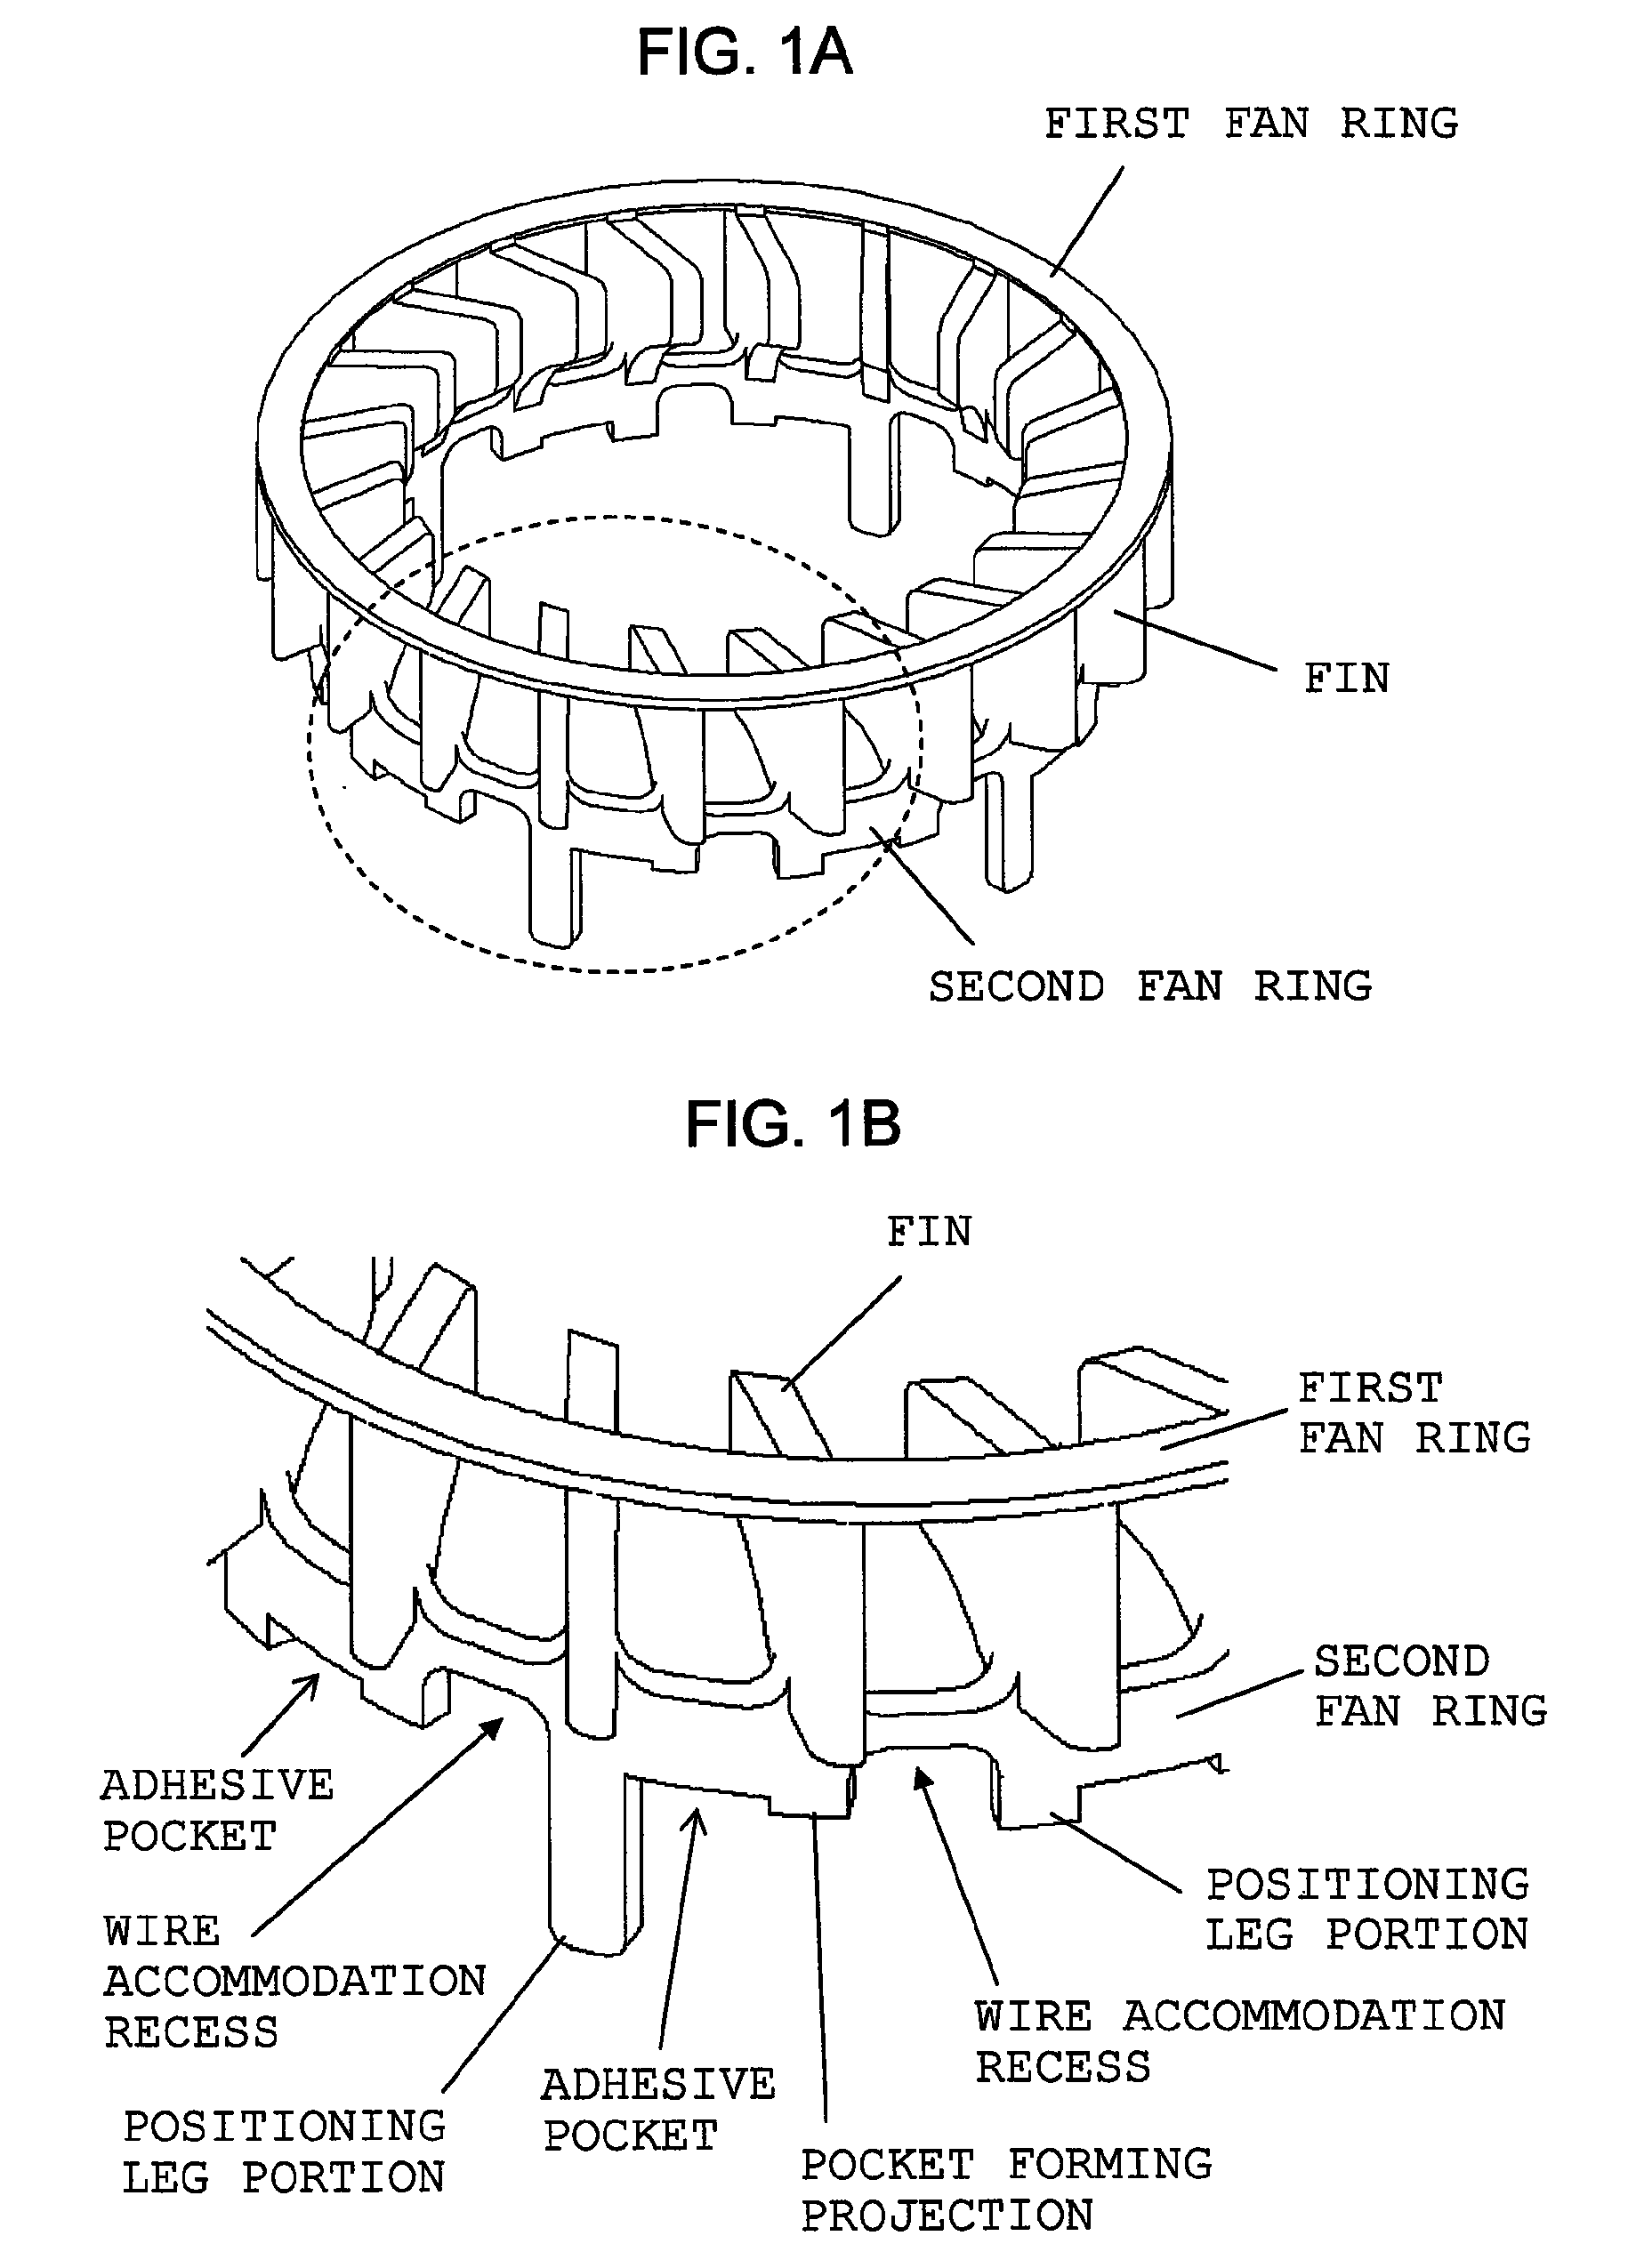 Cooling fan built into rotor